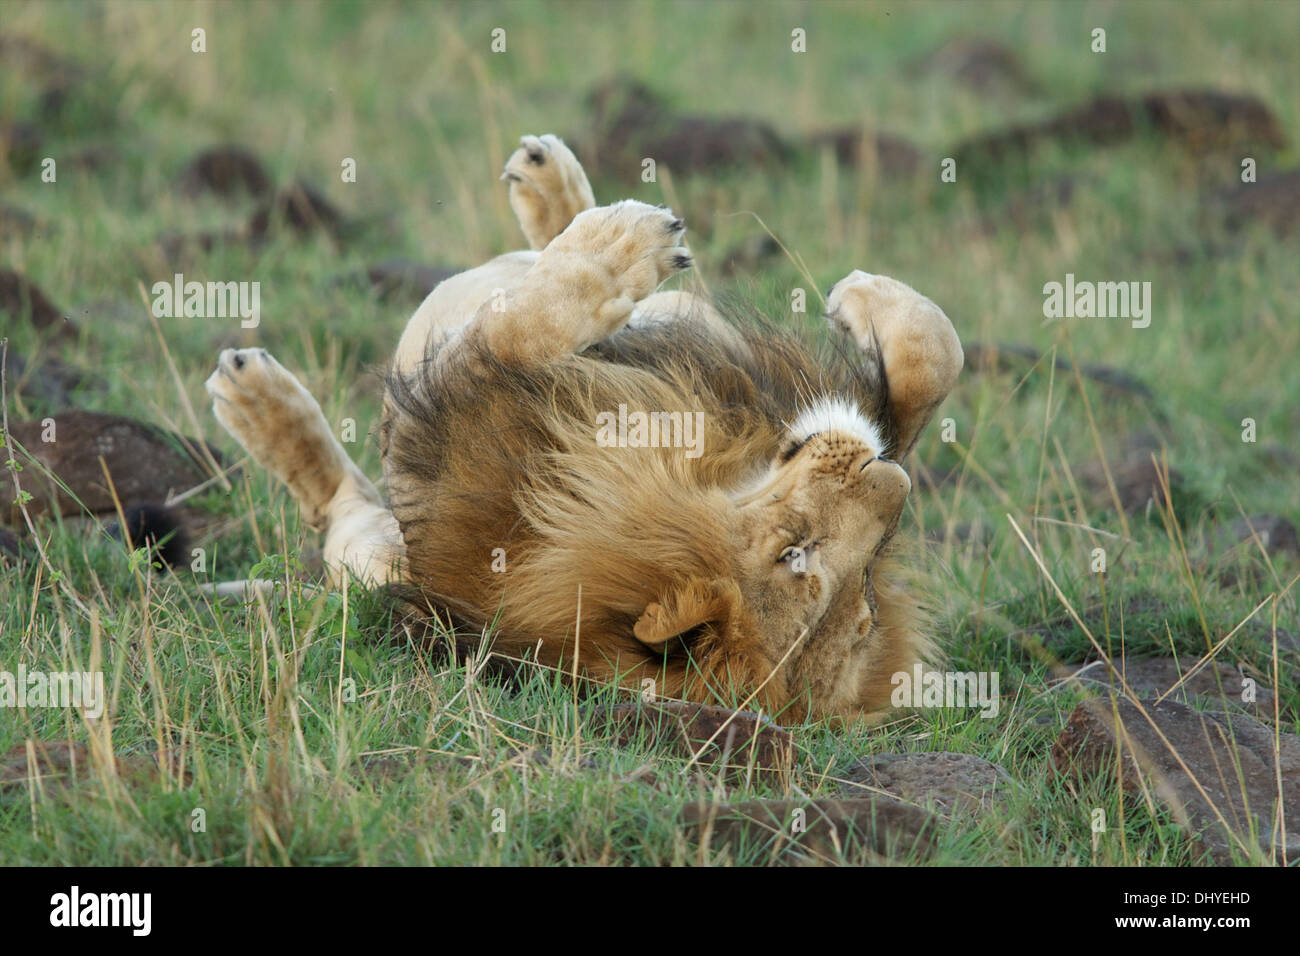 Lion King Jungle In Natural Stock Photos Lion King Jungle In